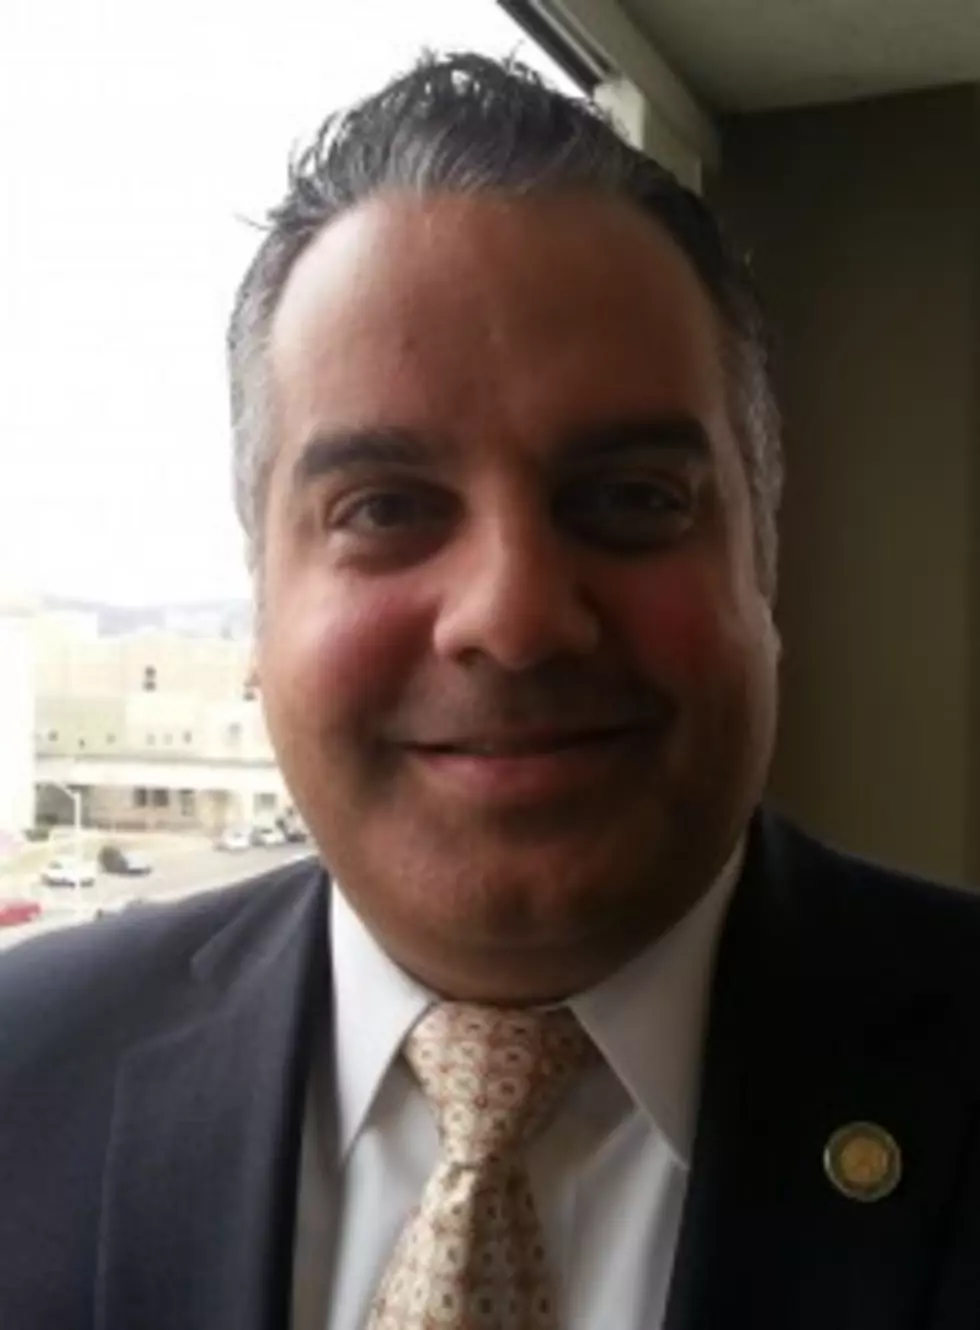 Attorney Wants Binghamton Mayor Removed From Office